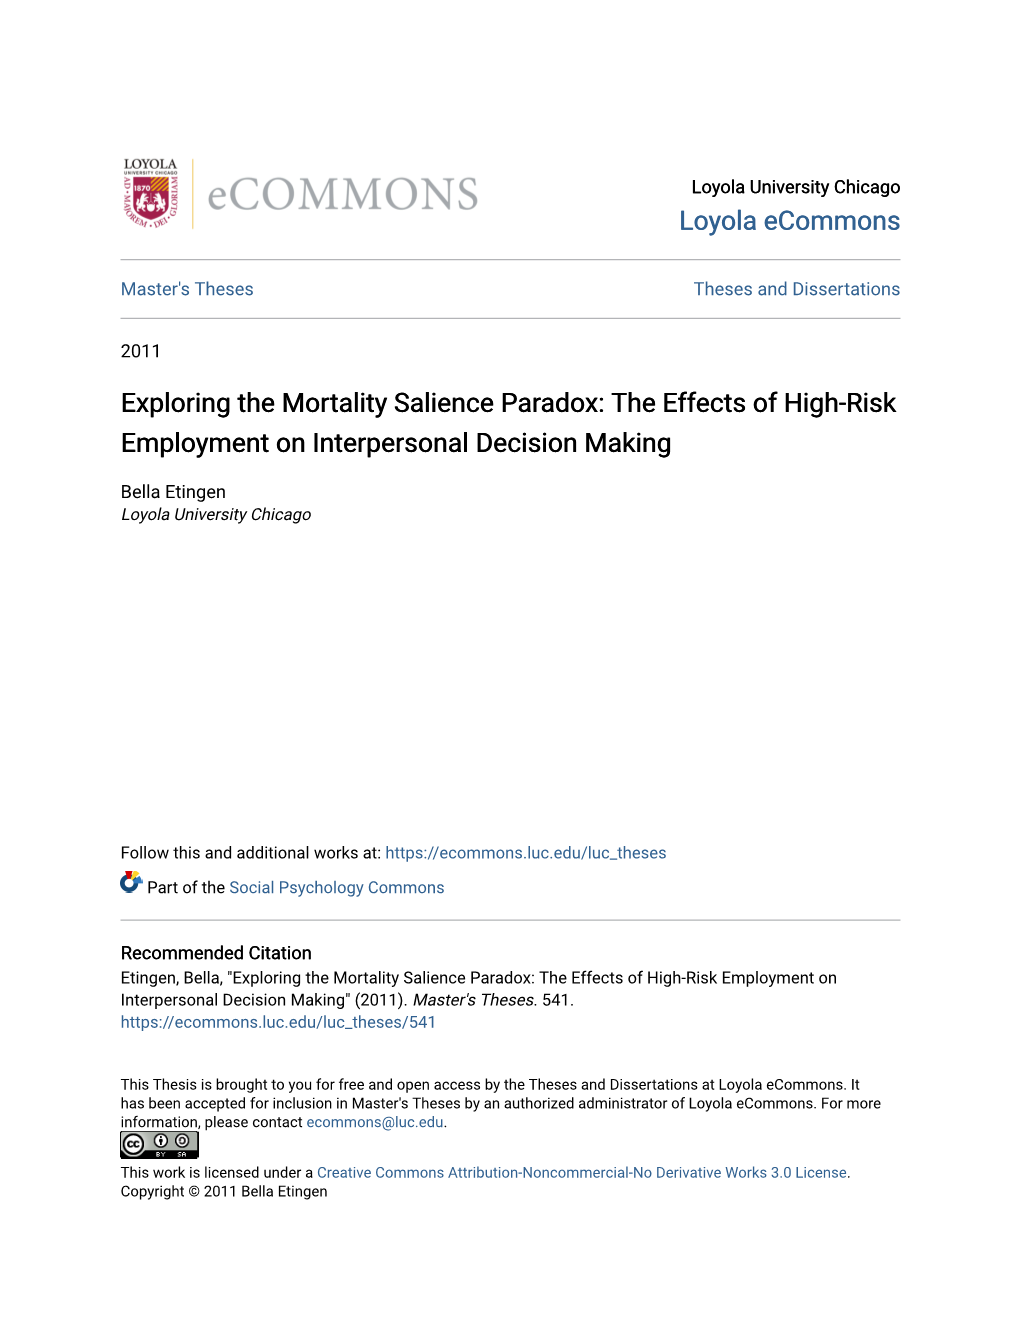 Exploring the Mortality Salience Paradox: the Effects of High-Risk Employment on Interpersonal Decision Making